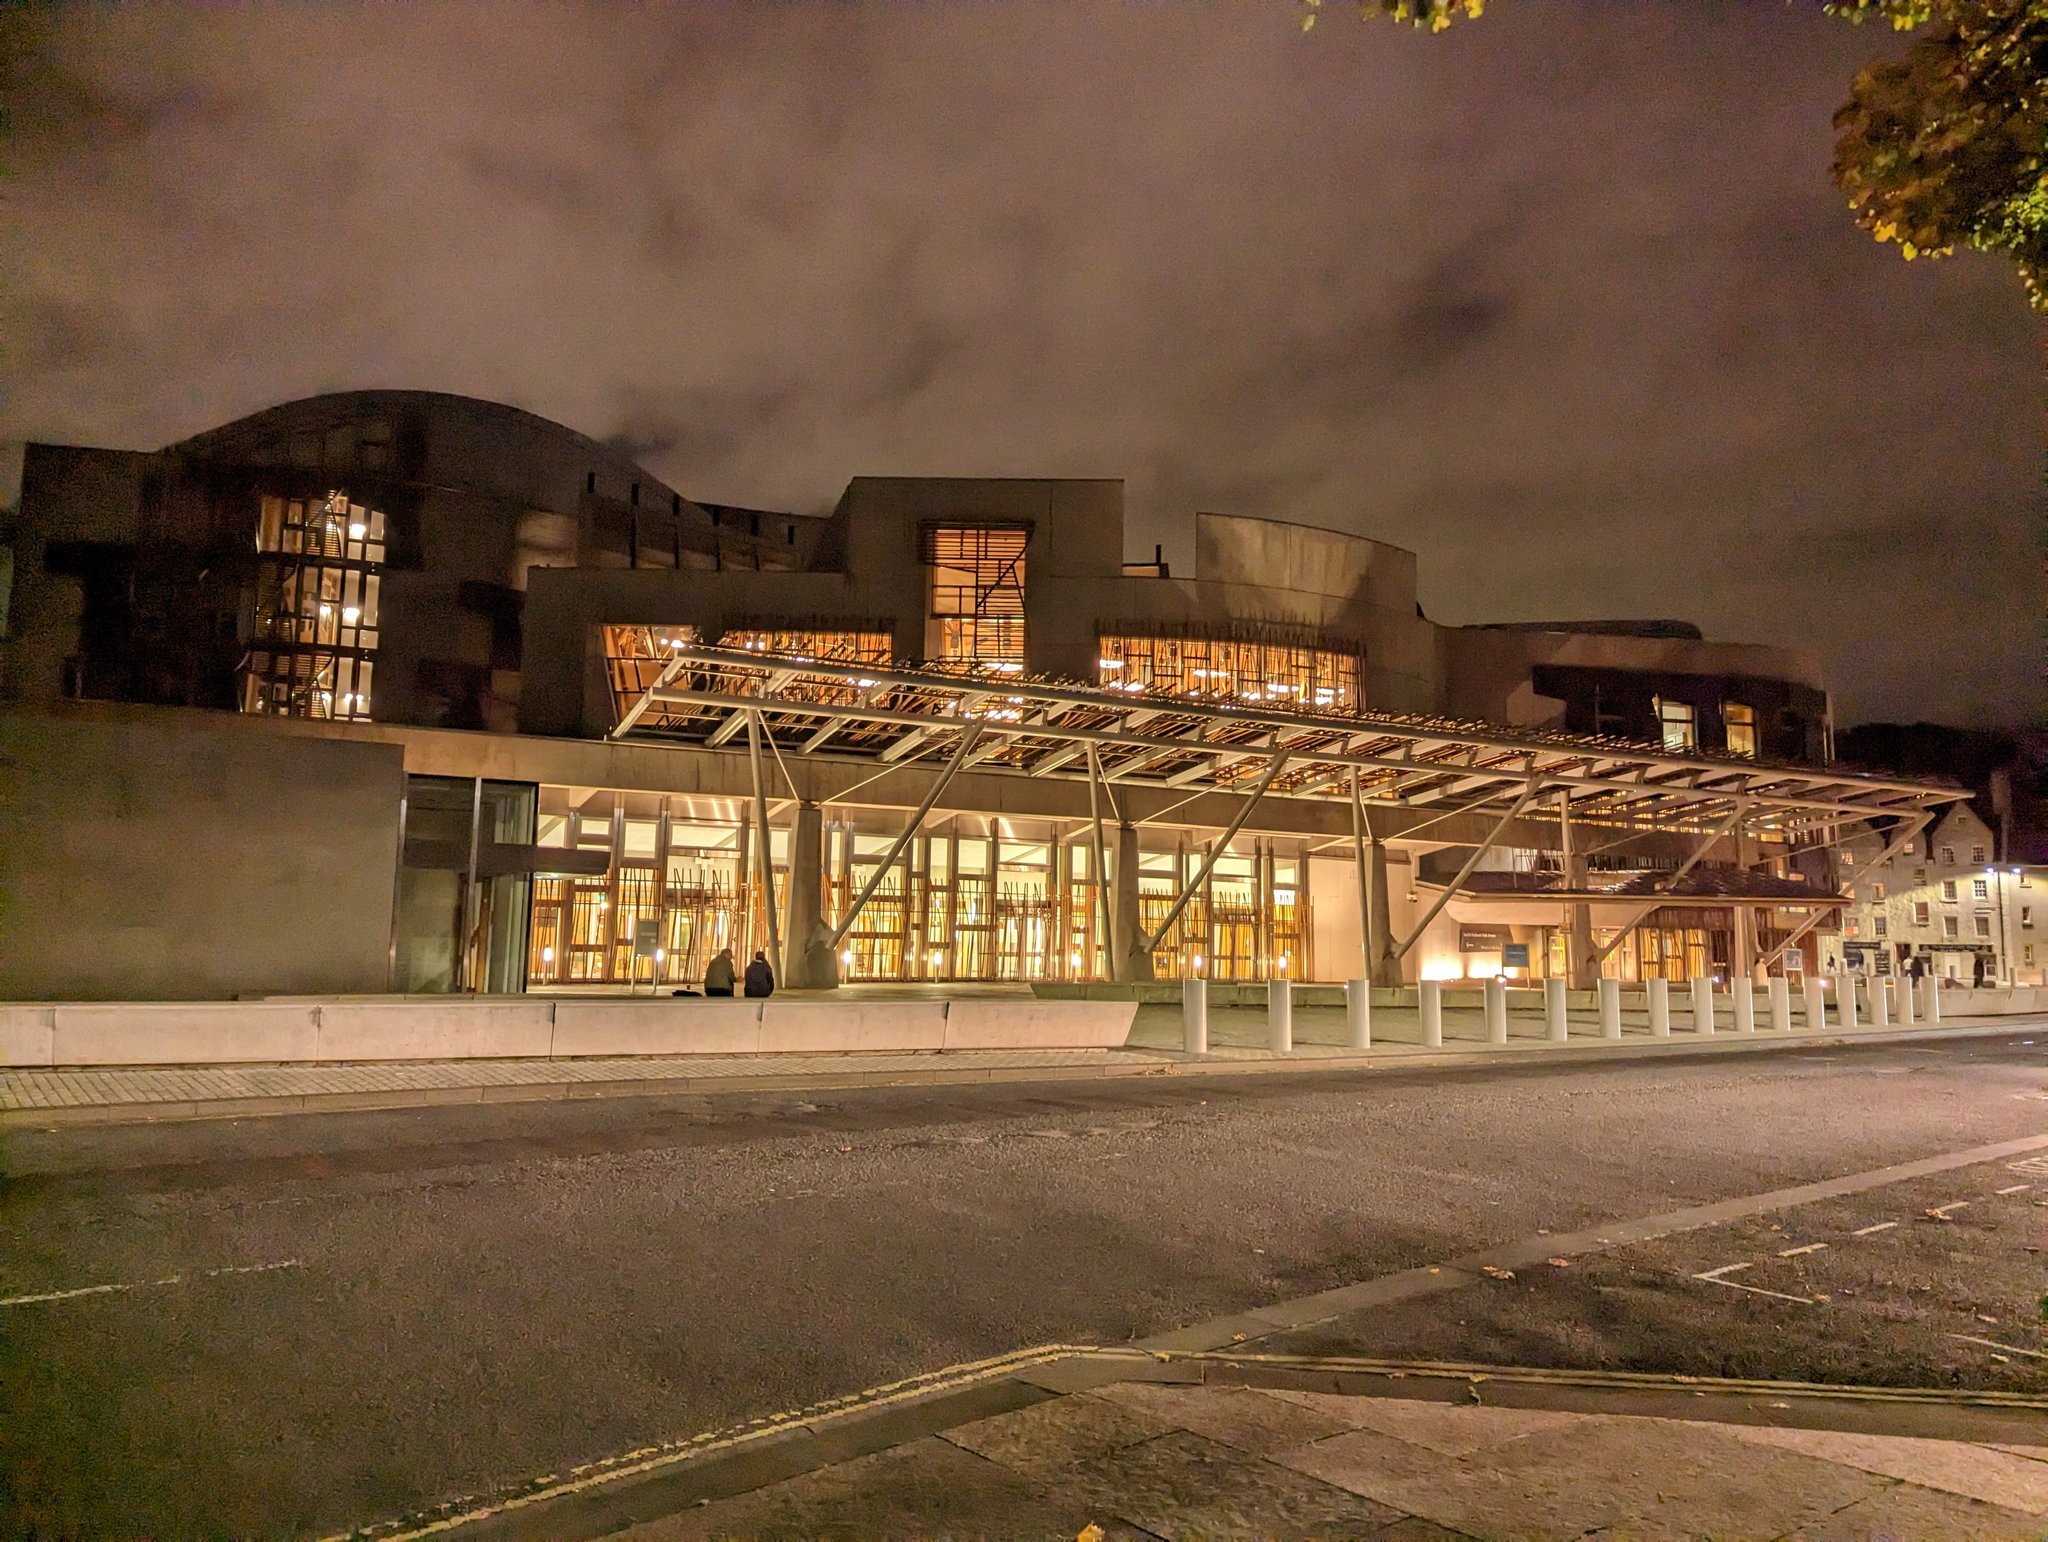 The image shows a large building, The Scottish Parliment, at nighttime with illuminated windows. The architecture features a mix of curved and angular elements, with some parts of the building having what appears to be metal framework visible from the outside. A canopy-like structure covers an area in front of the building, likely indicating an entrance or a covered walkway, with lights casting a warm glow underneath it. The sky is dusky or possibly overcast. In front of the building, there is a street with no visible traffic at the moment, and a pedestrian area with bollards demarcating the edge of the sidewalk. There also appears to be a lone person standing under the canopy structure. The overall scene is quite peaceful and deserted, which is common for urban areas during nighttime hours. The style of the building suggests it might be a modern cultural, educational, or business facility.